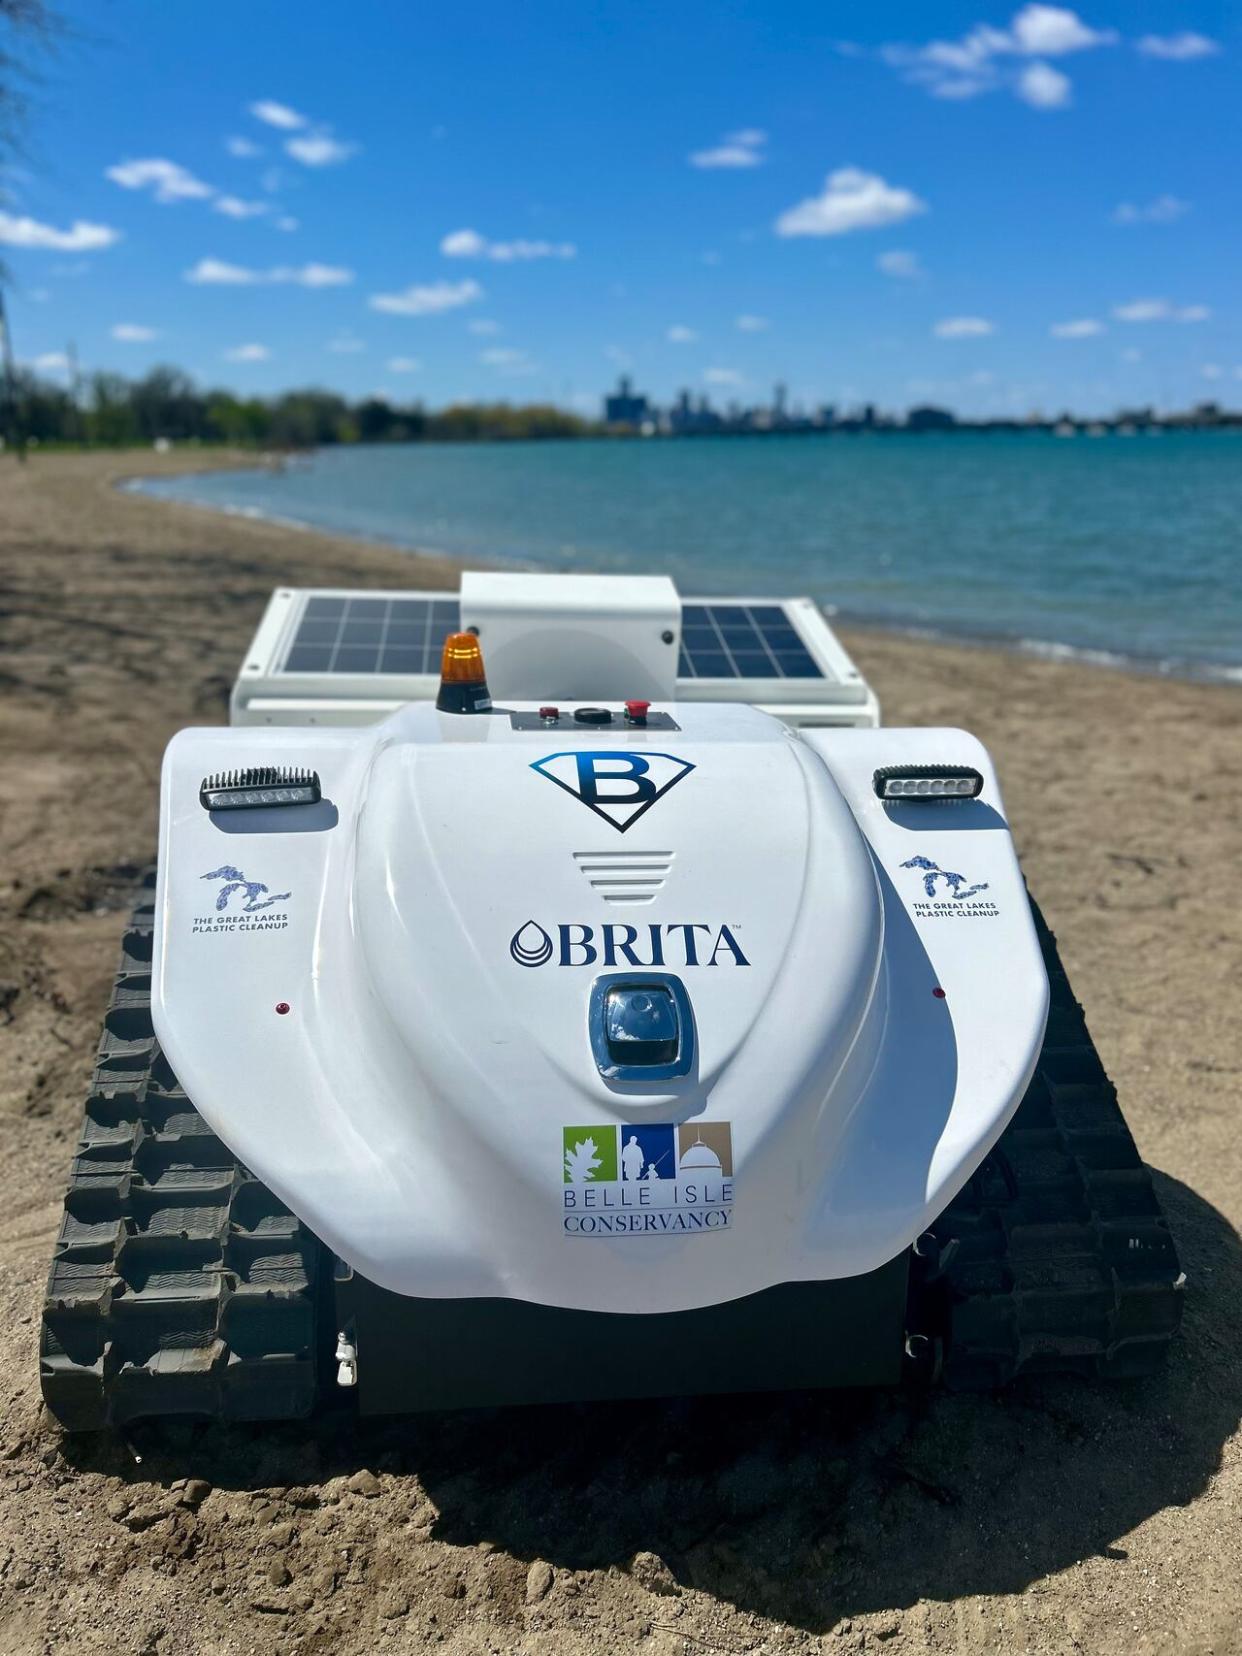 A beach robot for Belle Isle that scoops up plastics. (City of Detroit - image credit)